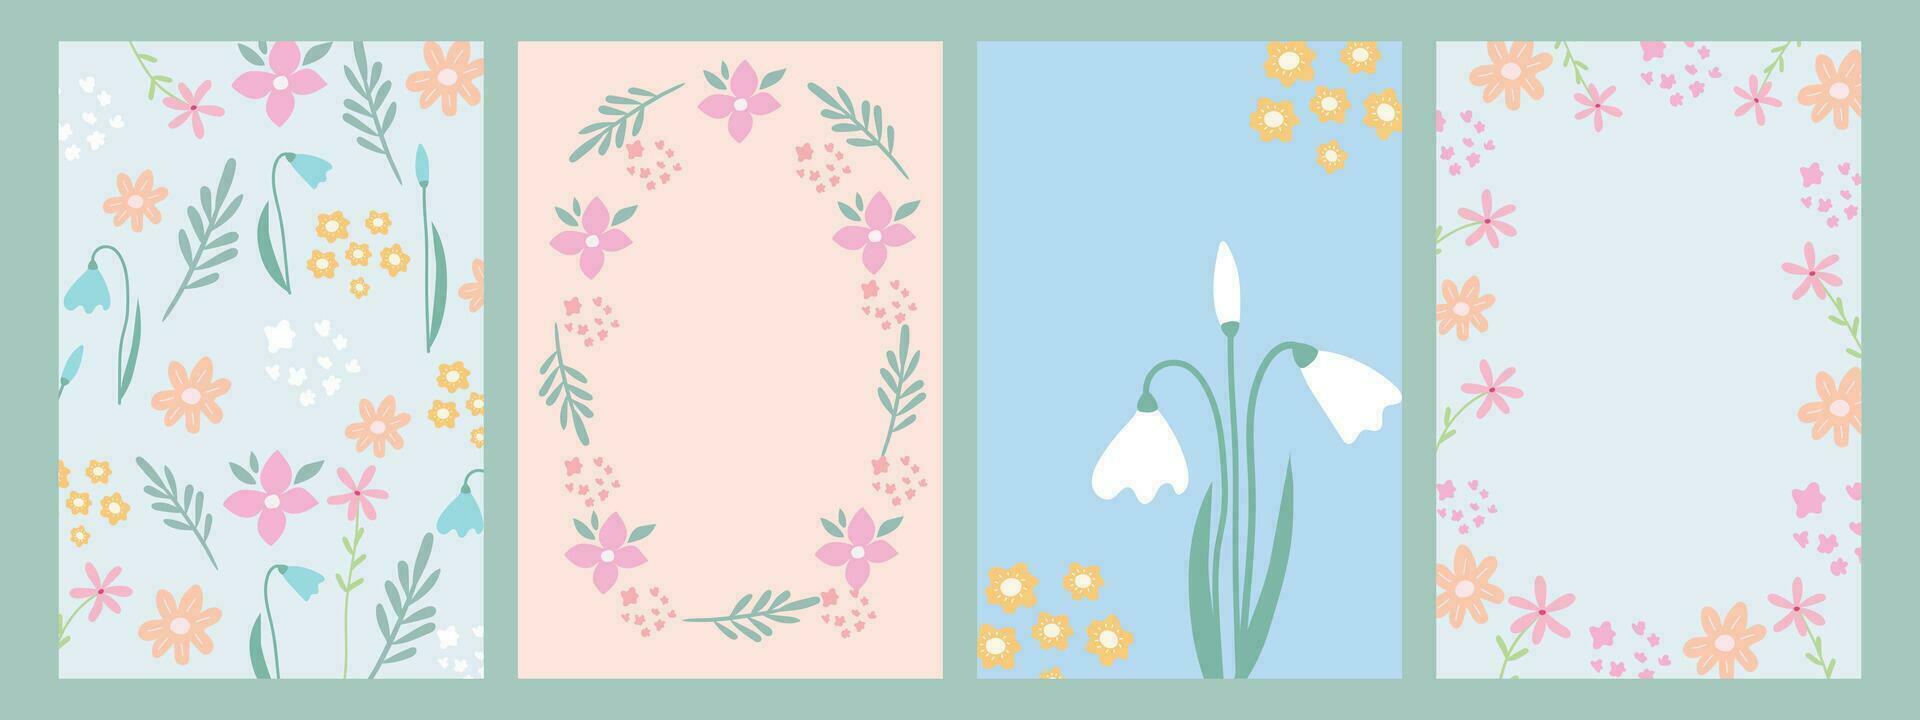 Cute floral frames and covers, cards, templates in pastel colors. vector